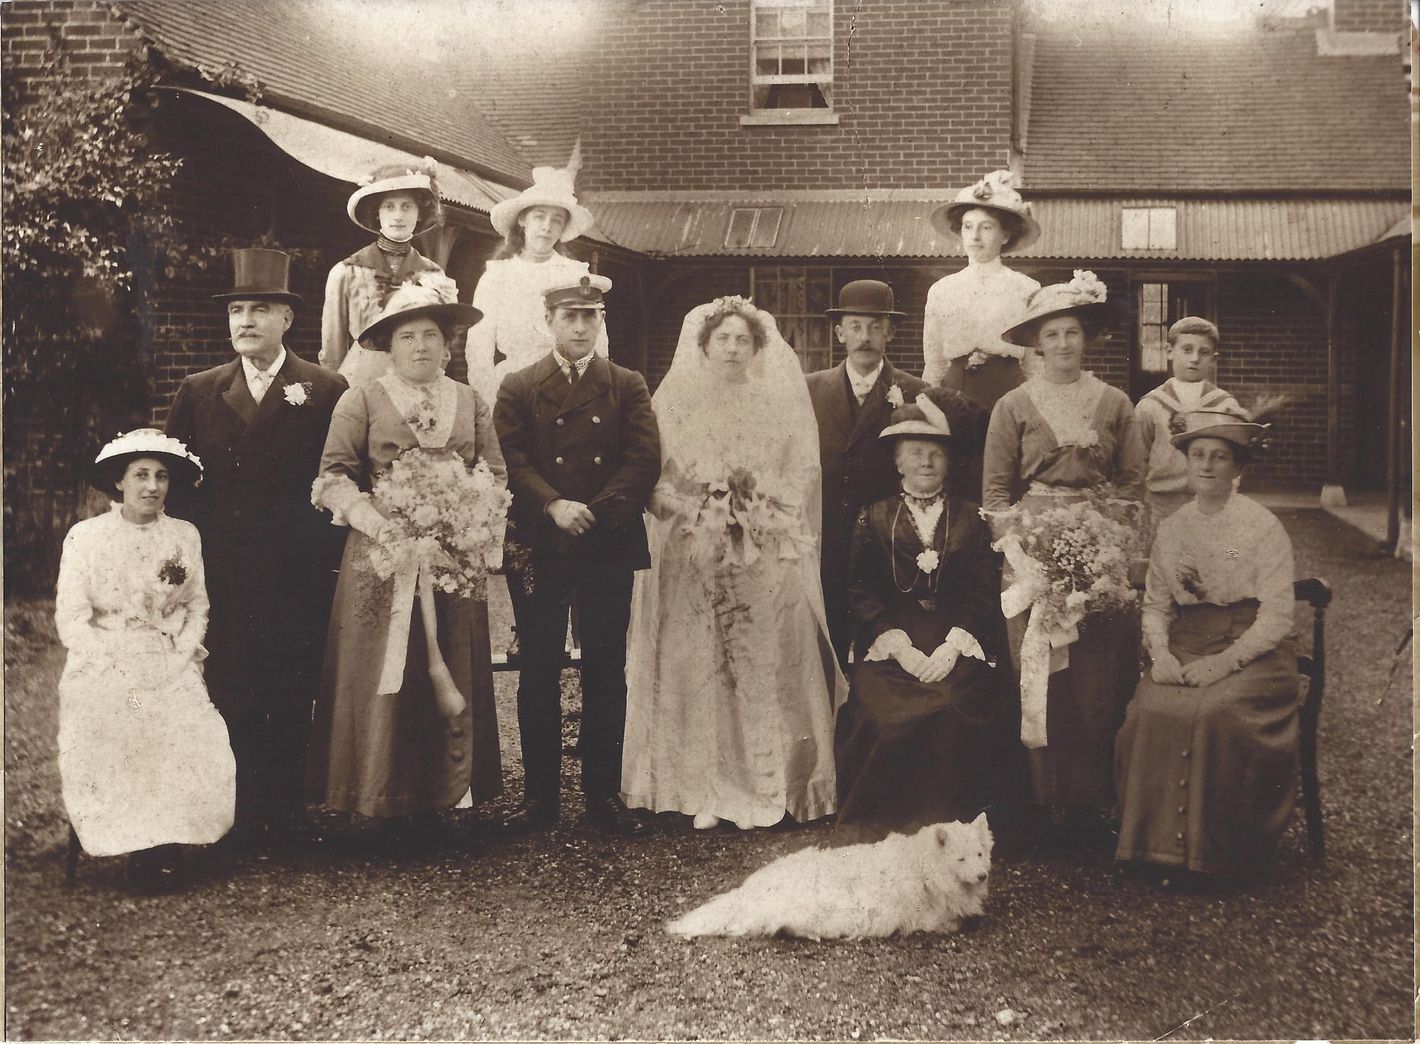 Group photo of a early 20th-century marriage, and a dog.